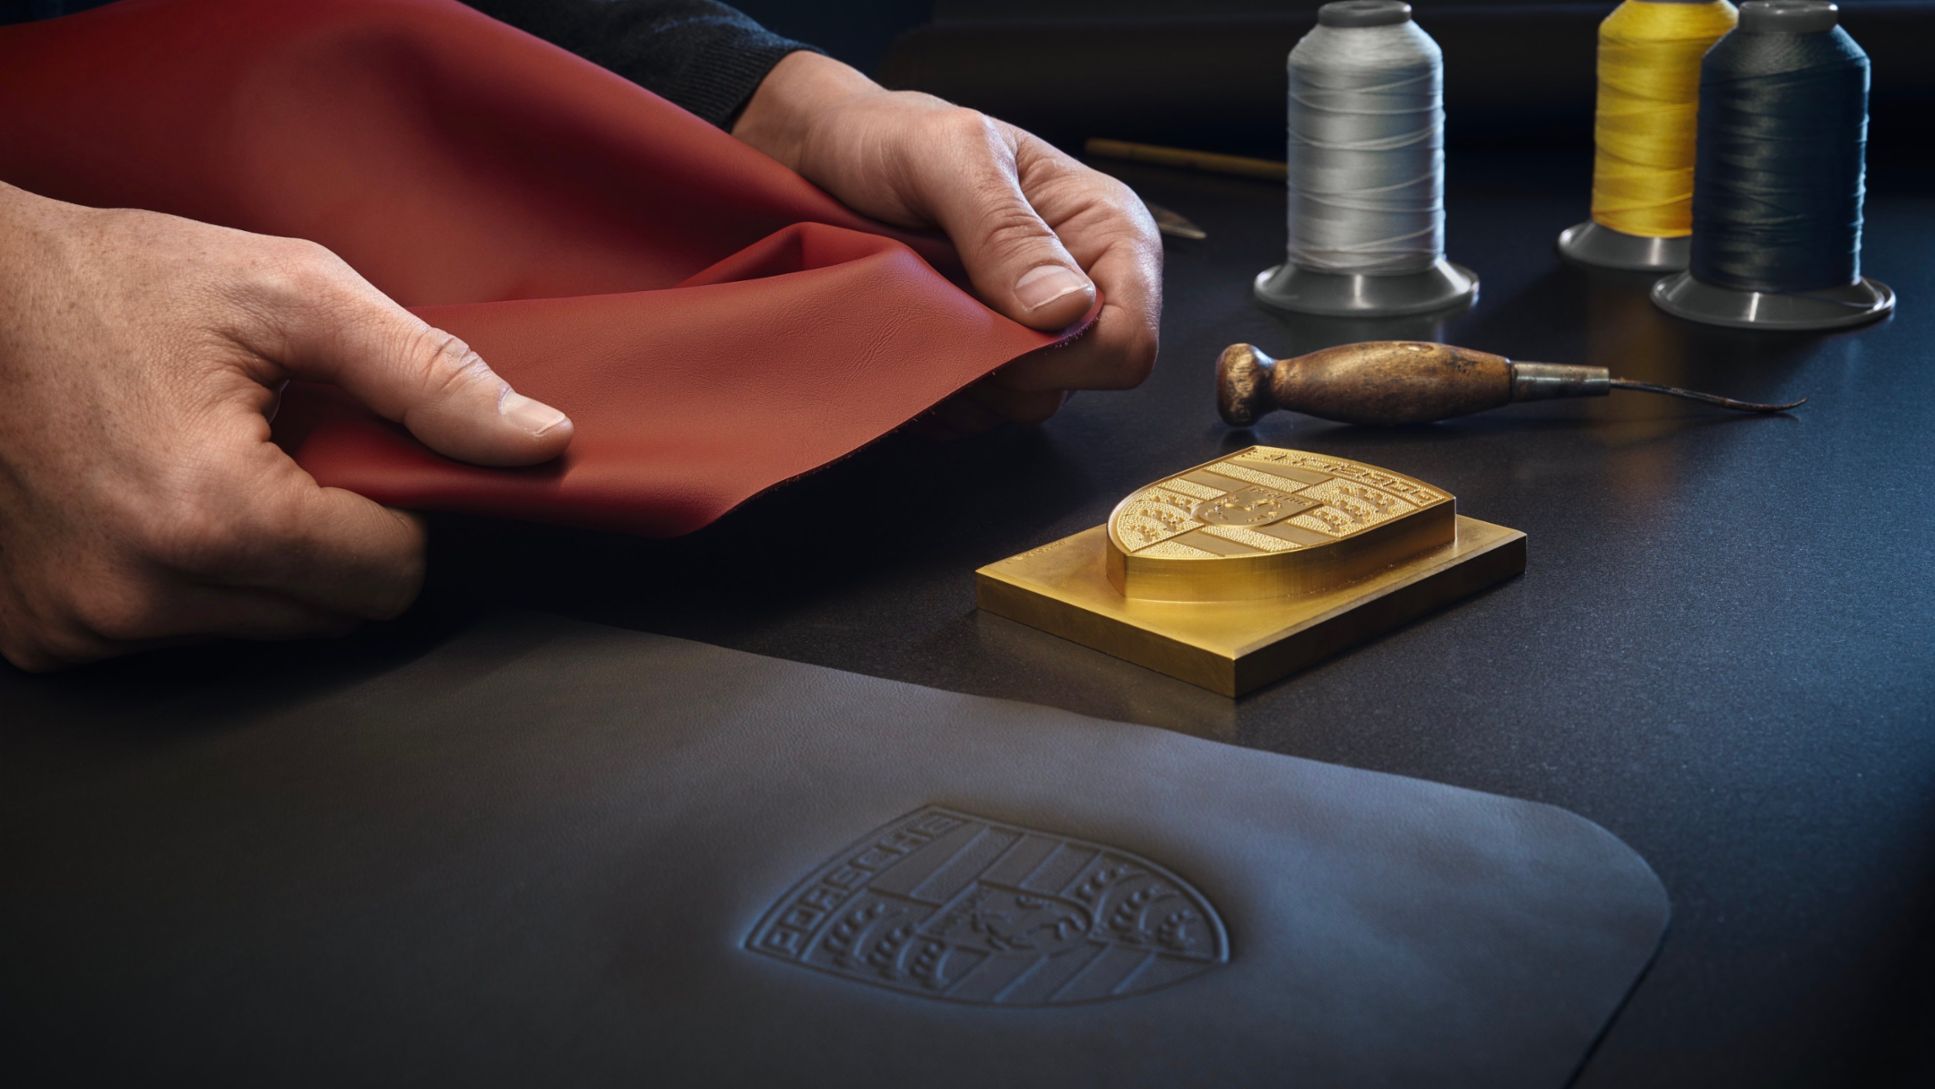 Porsche committed to more sustainable leather sourcing, 2023, Porsche AG